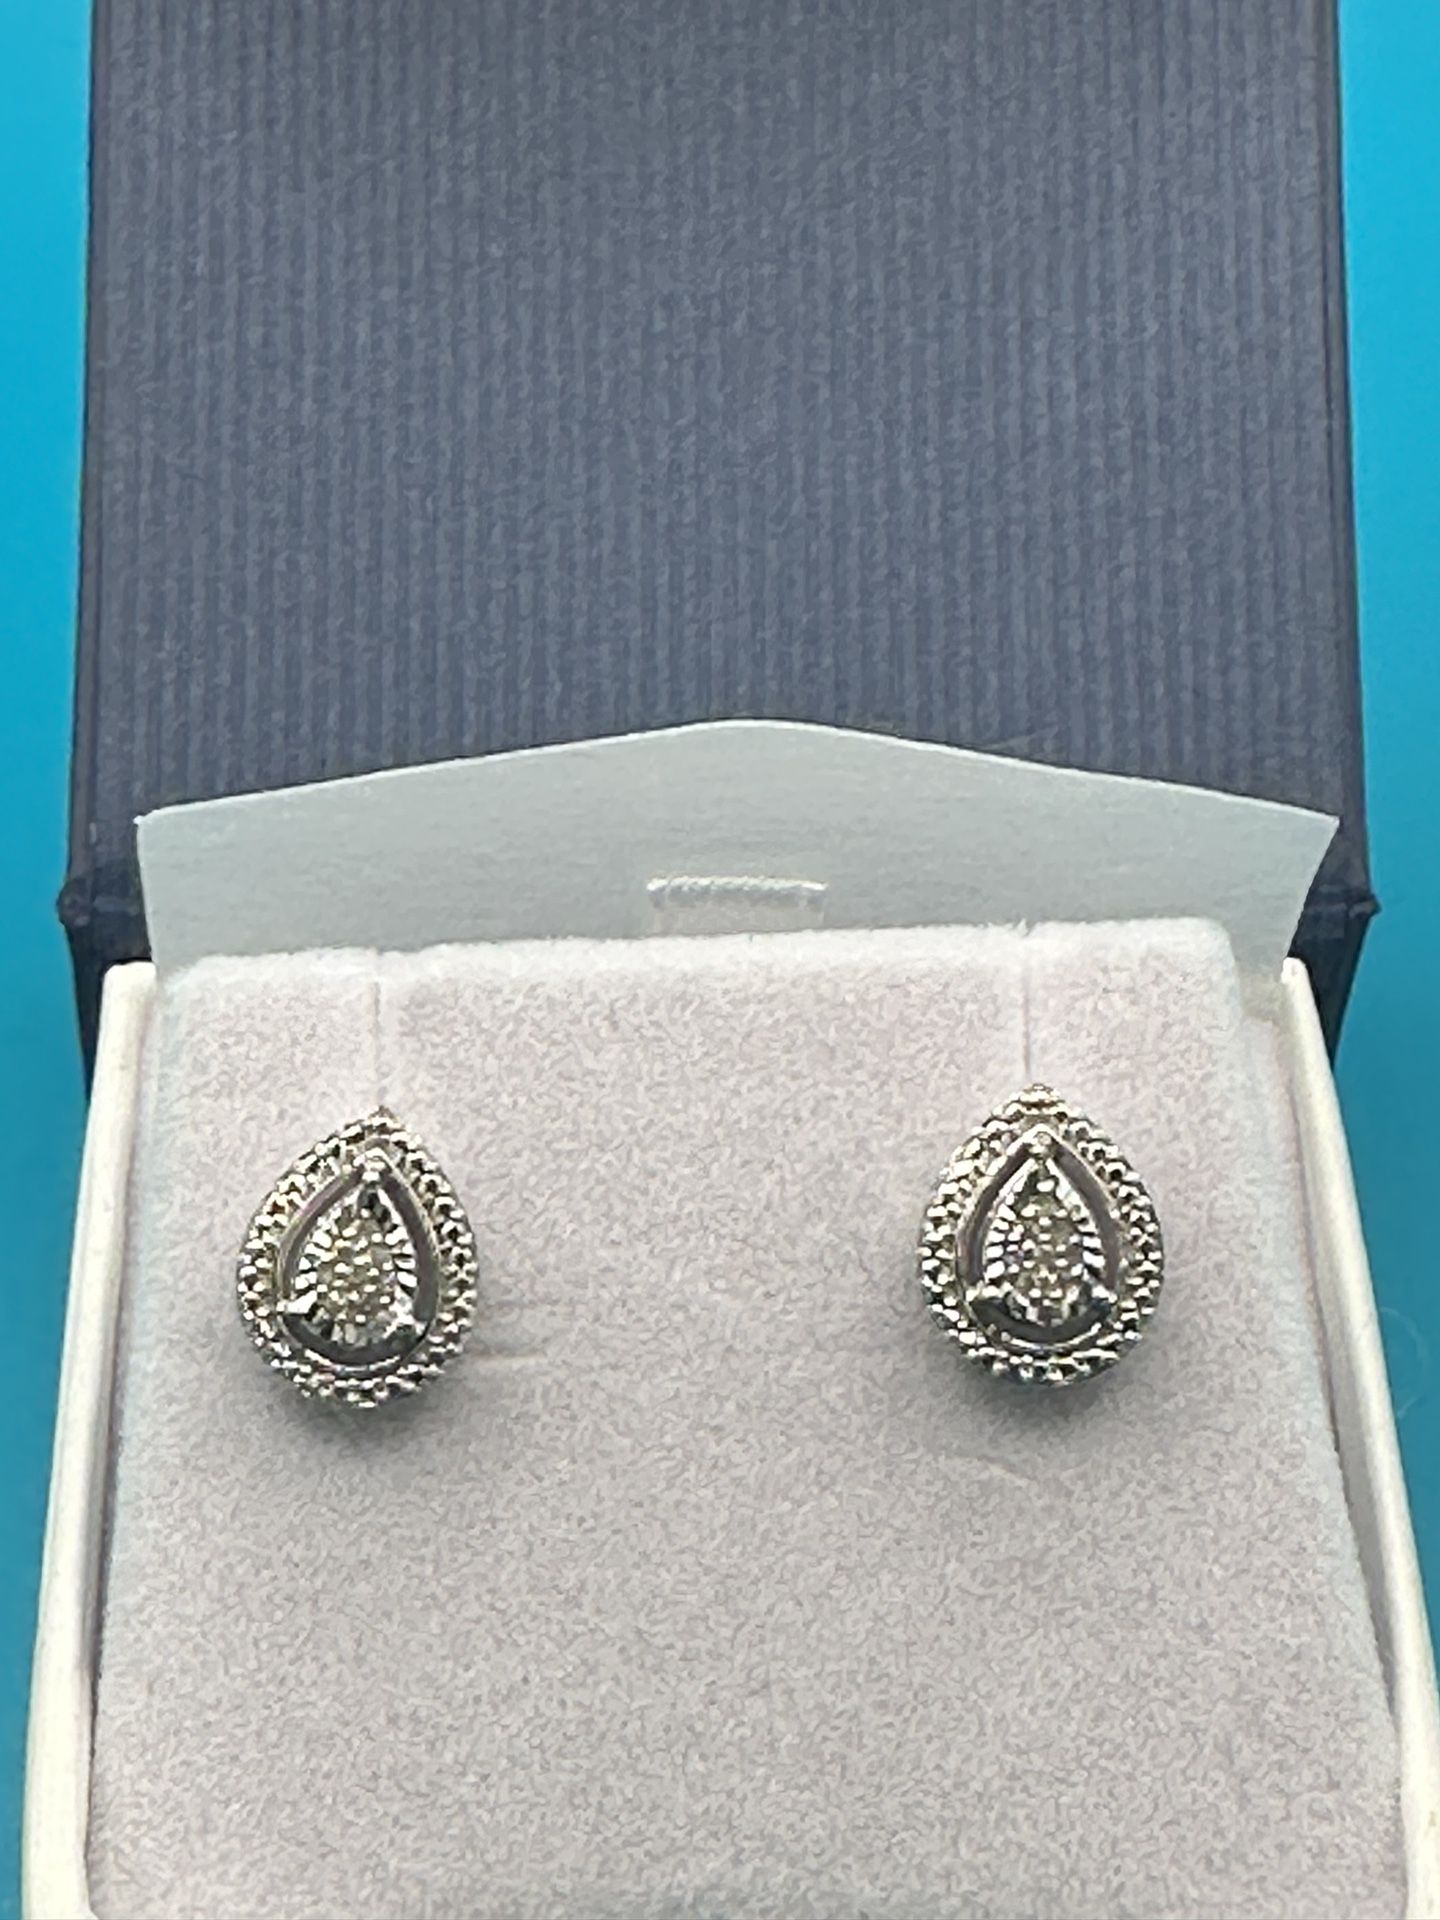 New Pear Cut Diamond Earrings  Allure Gem Brand Signed SK9 Sterling Silver & Diamonds Total Weight Of 2.47 Grams 